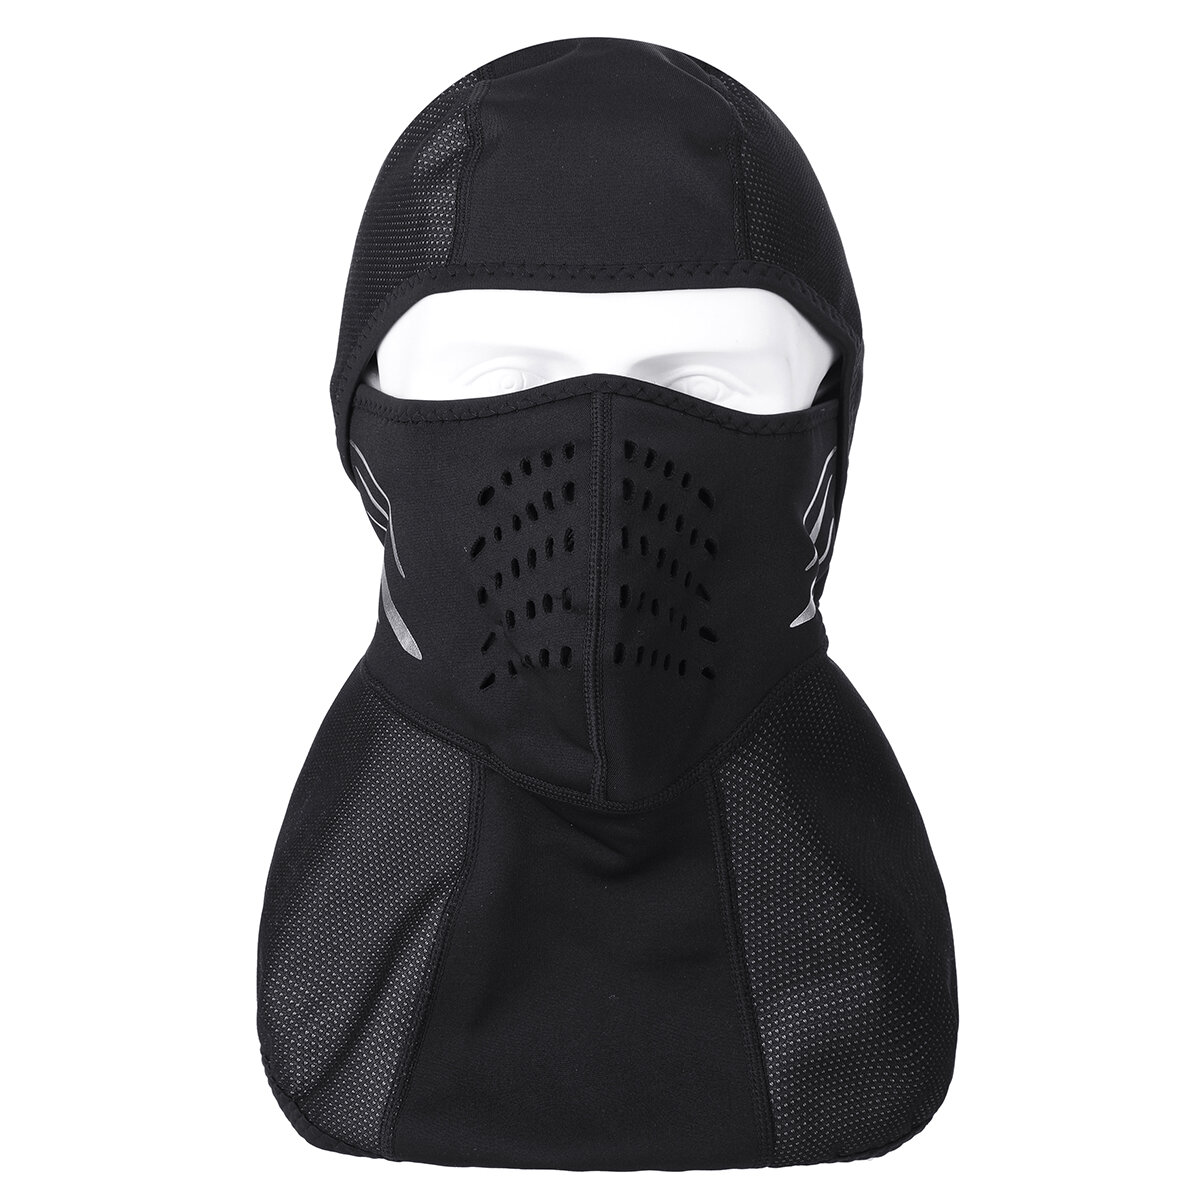 AUDEW Lightweight Windproof Mask Breathable Winter Ski Face Mask For Motorcycle Helmet Cycling Skiing